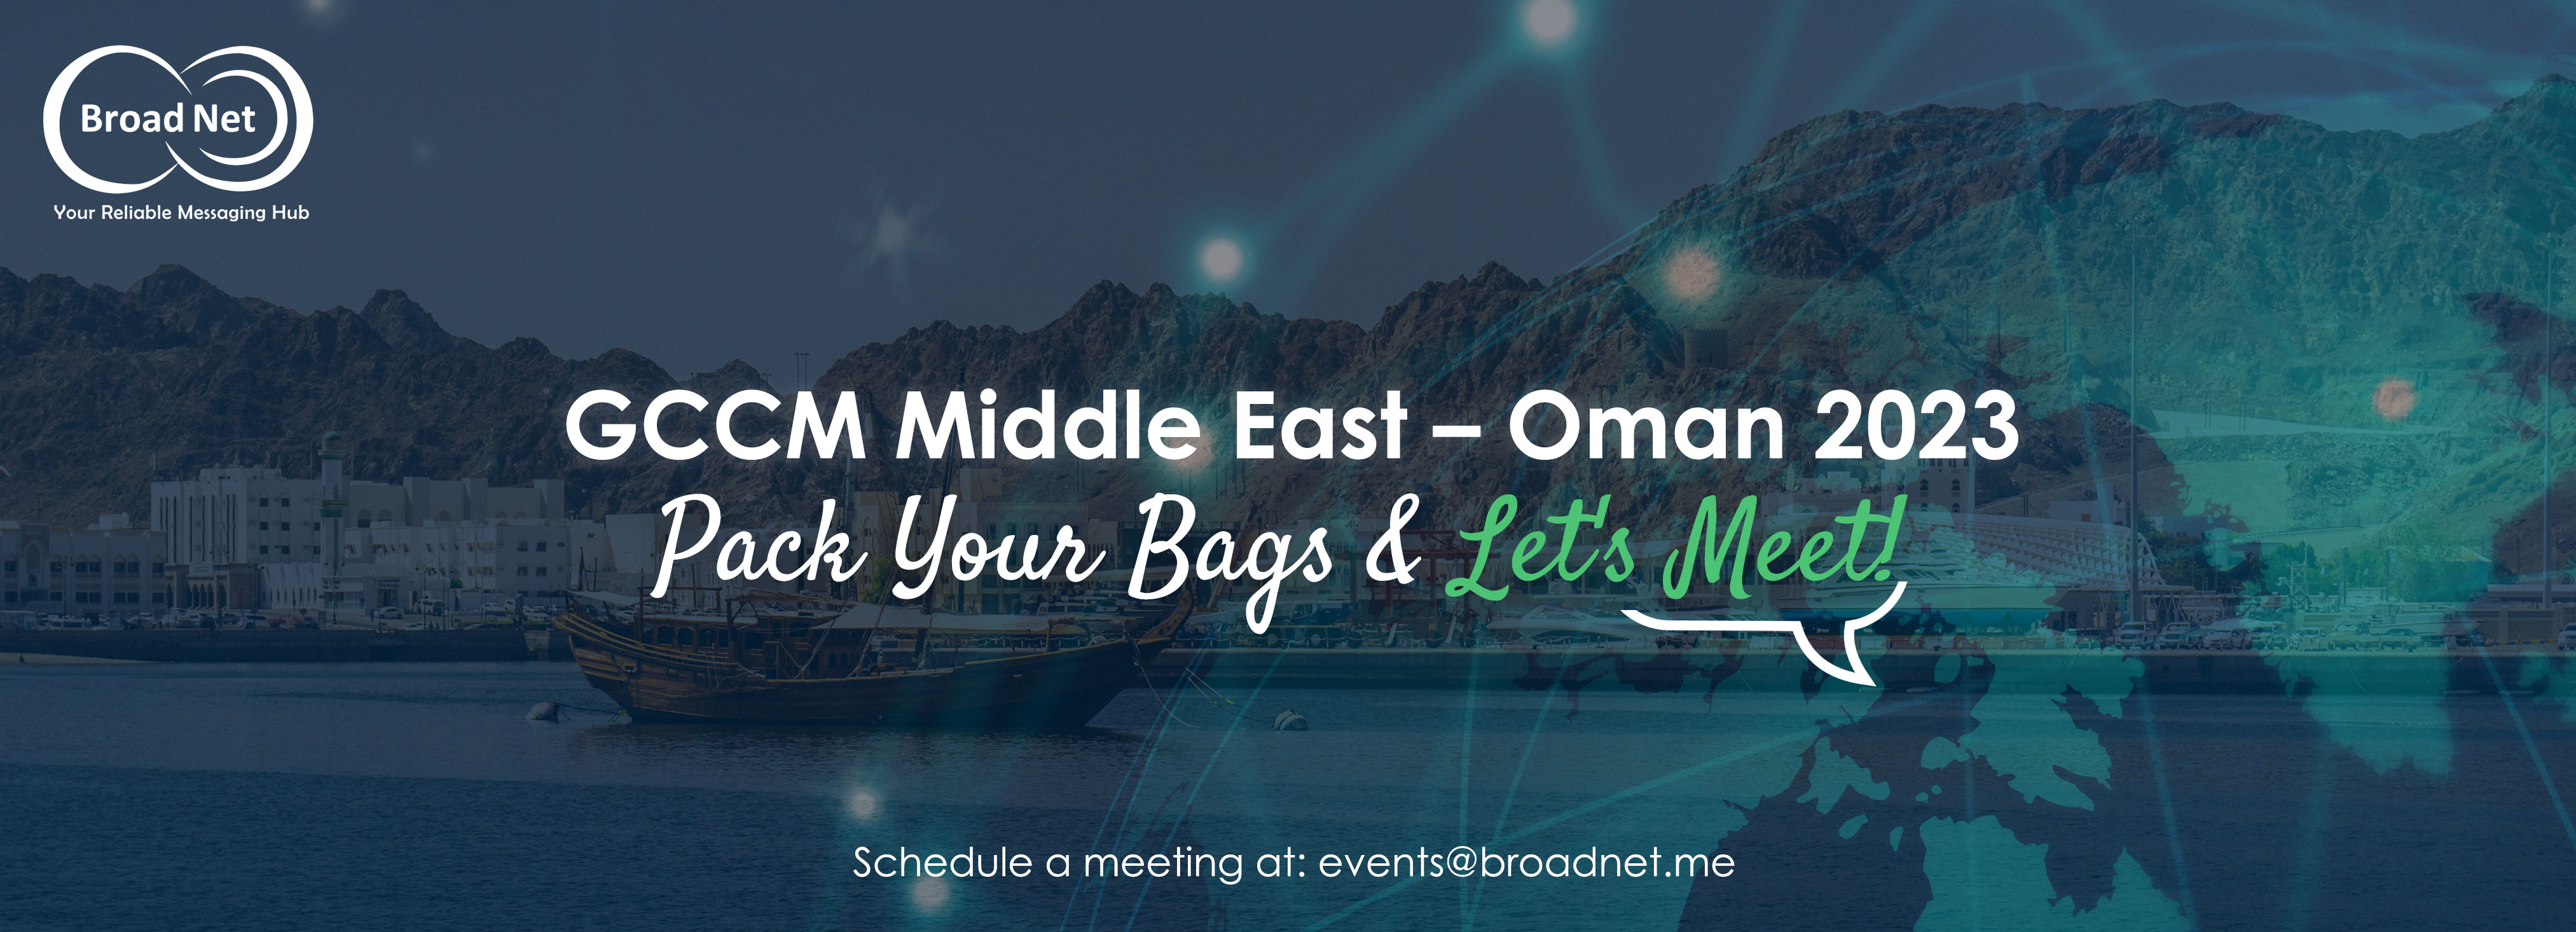 GCCM Middle East – OMAN 2023: Pack your bags and Let’s Meet!